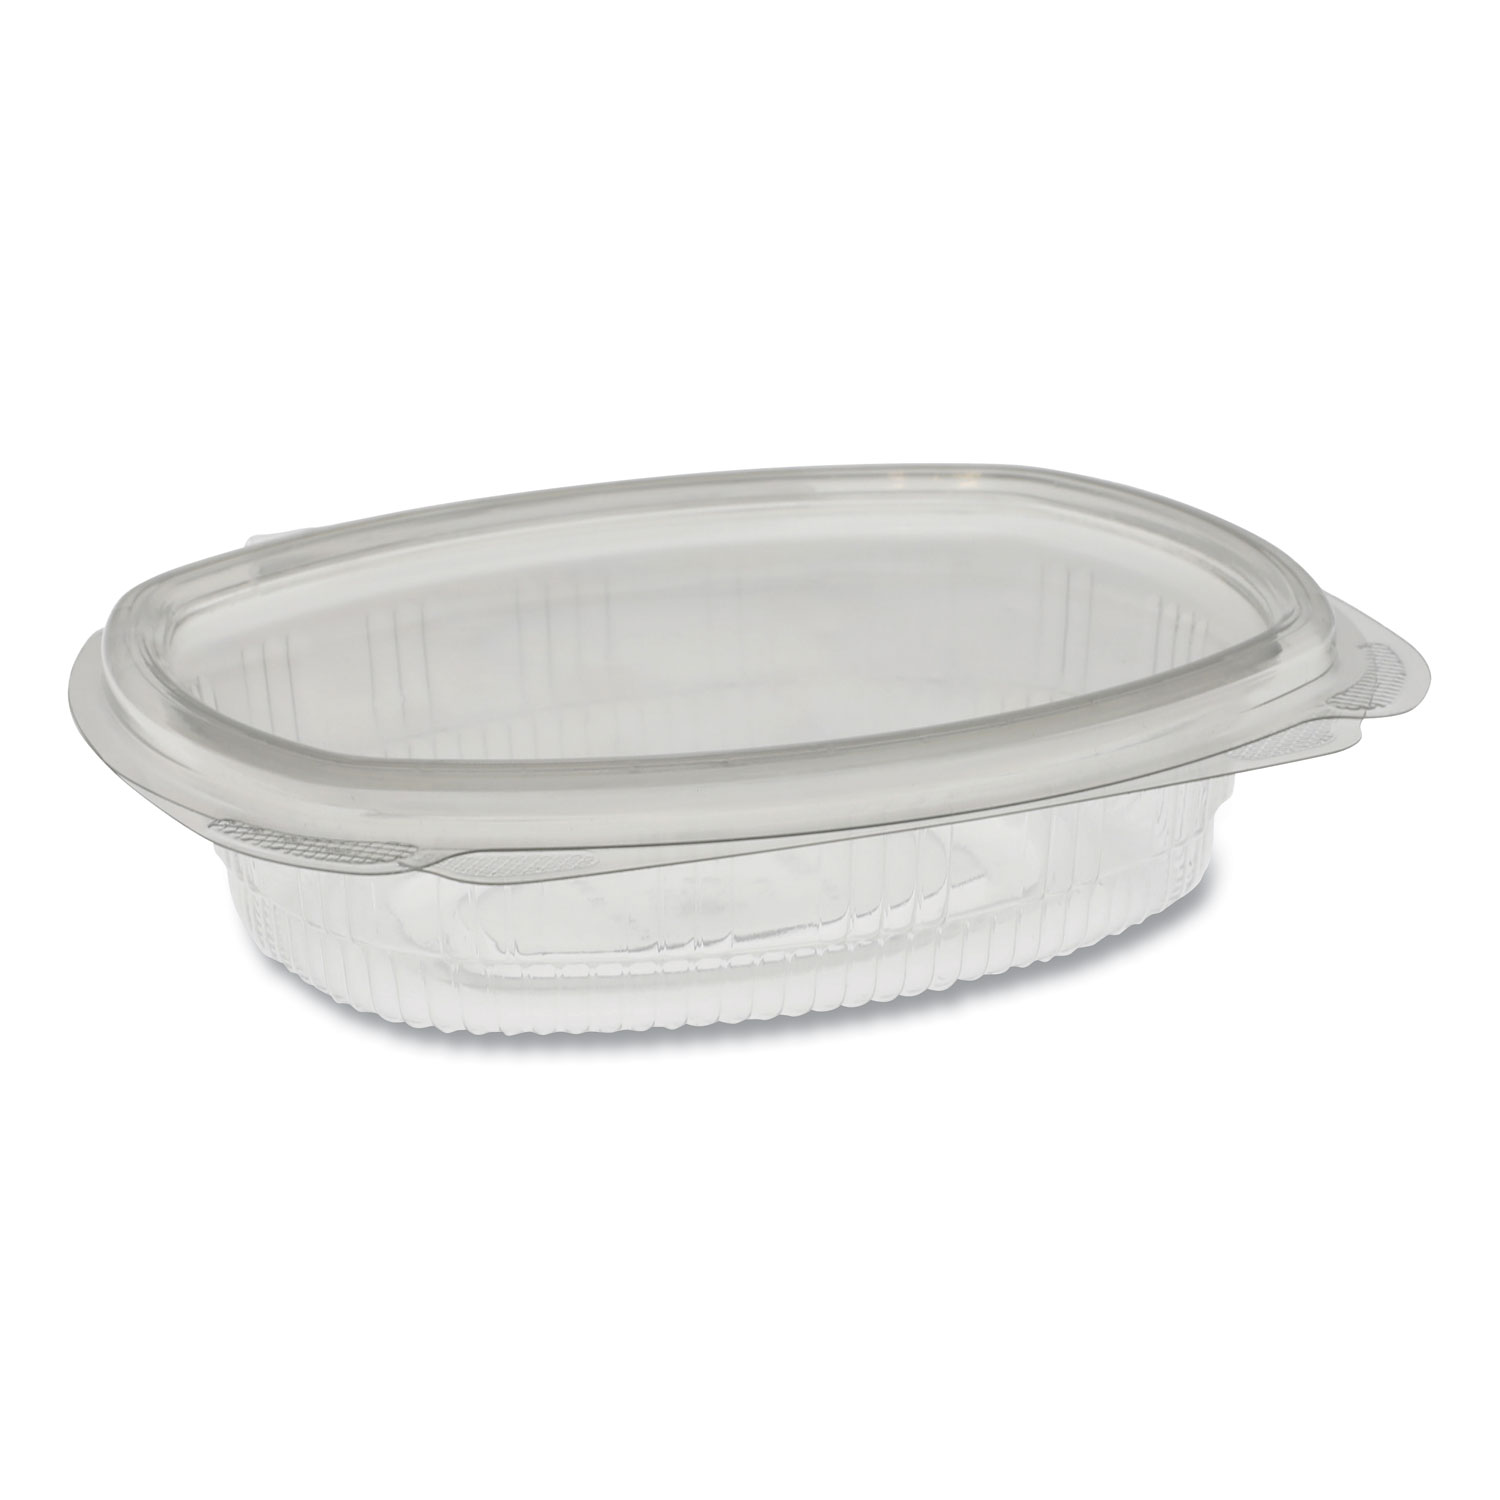  Pactiv 0CA910080000 EarthChoice PET Hinged Lid Deli Container, 4.92 x 5.87 x 1.32, 8 oz, 1-Compartment, Clear, 200/Carton (PCT0CA910080000) 